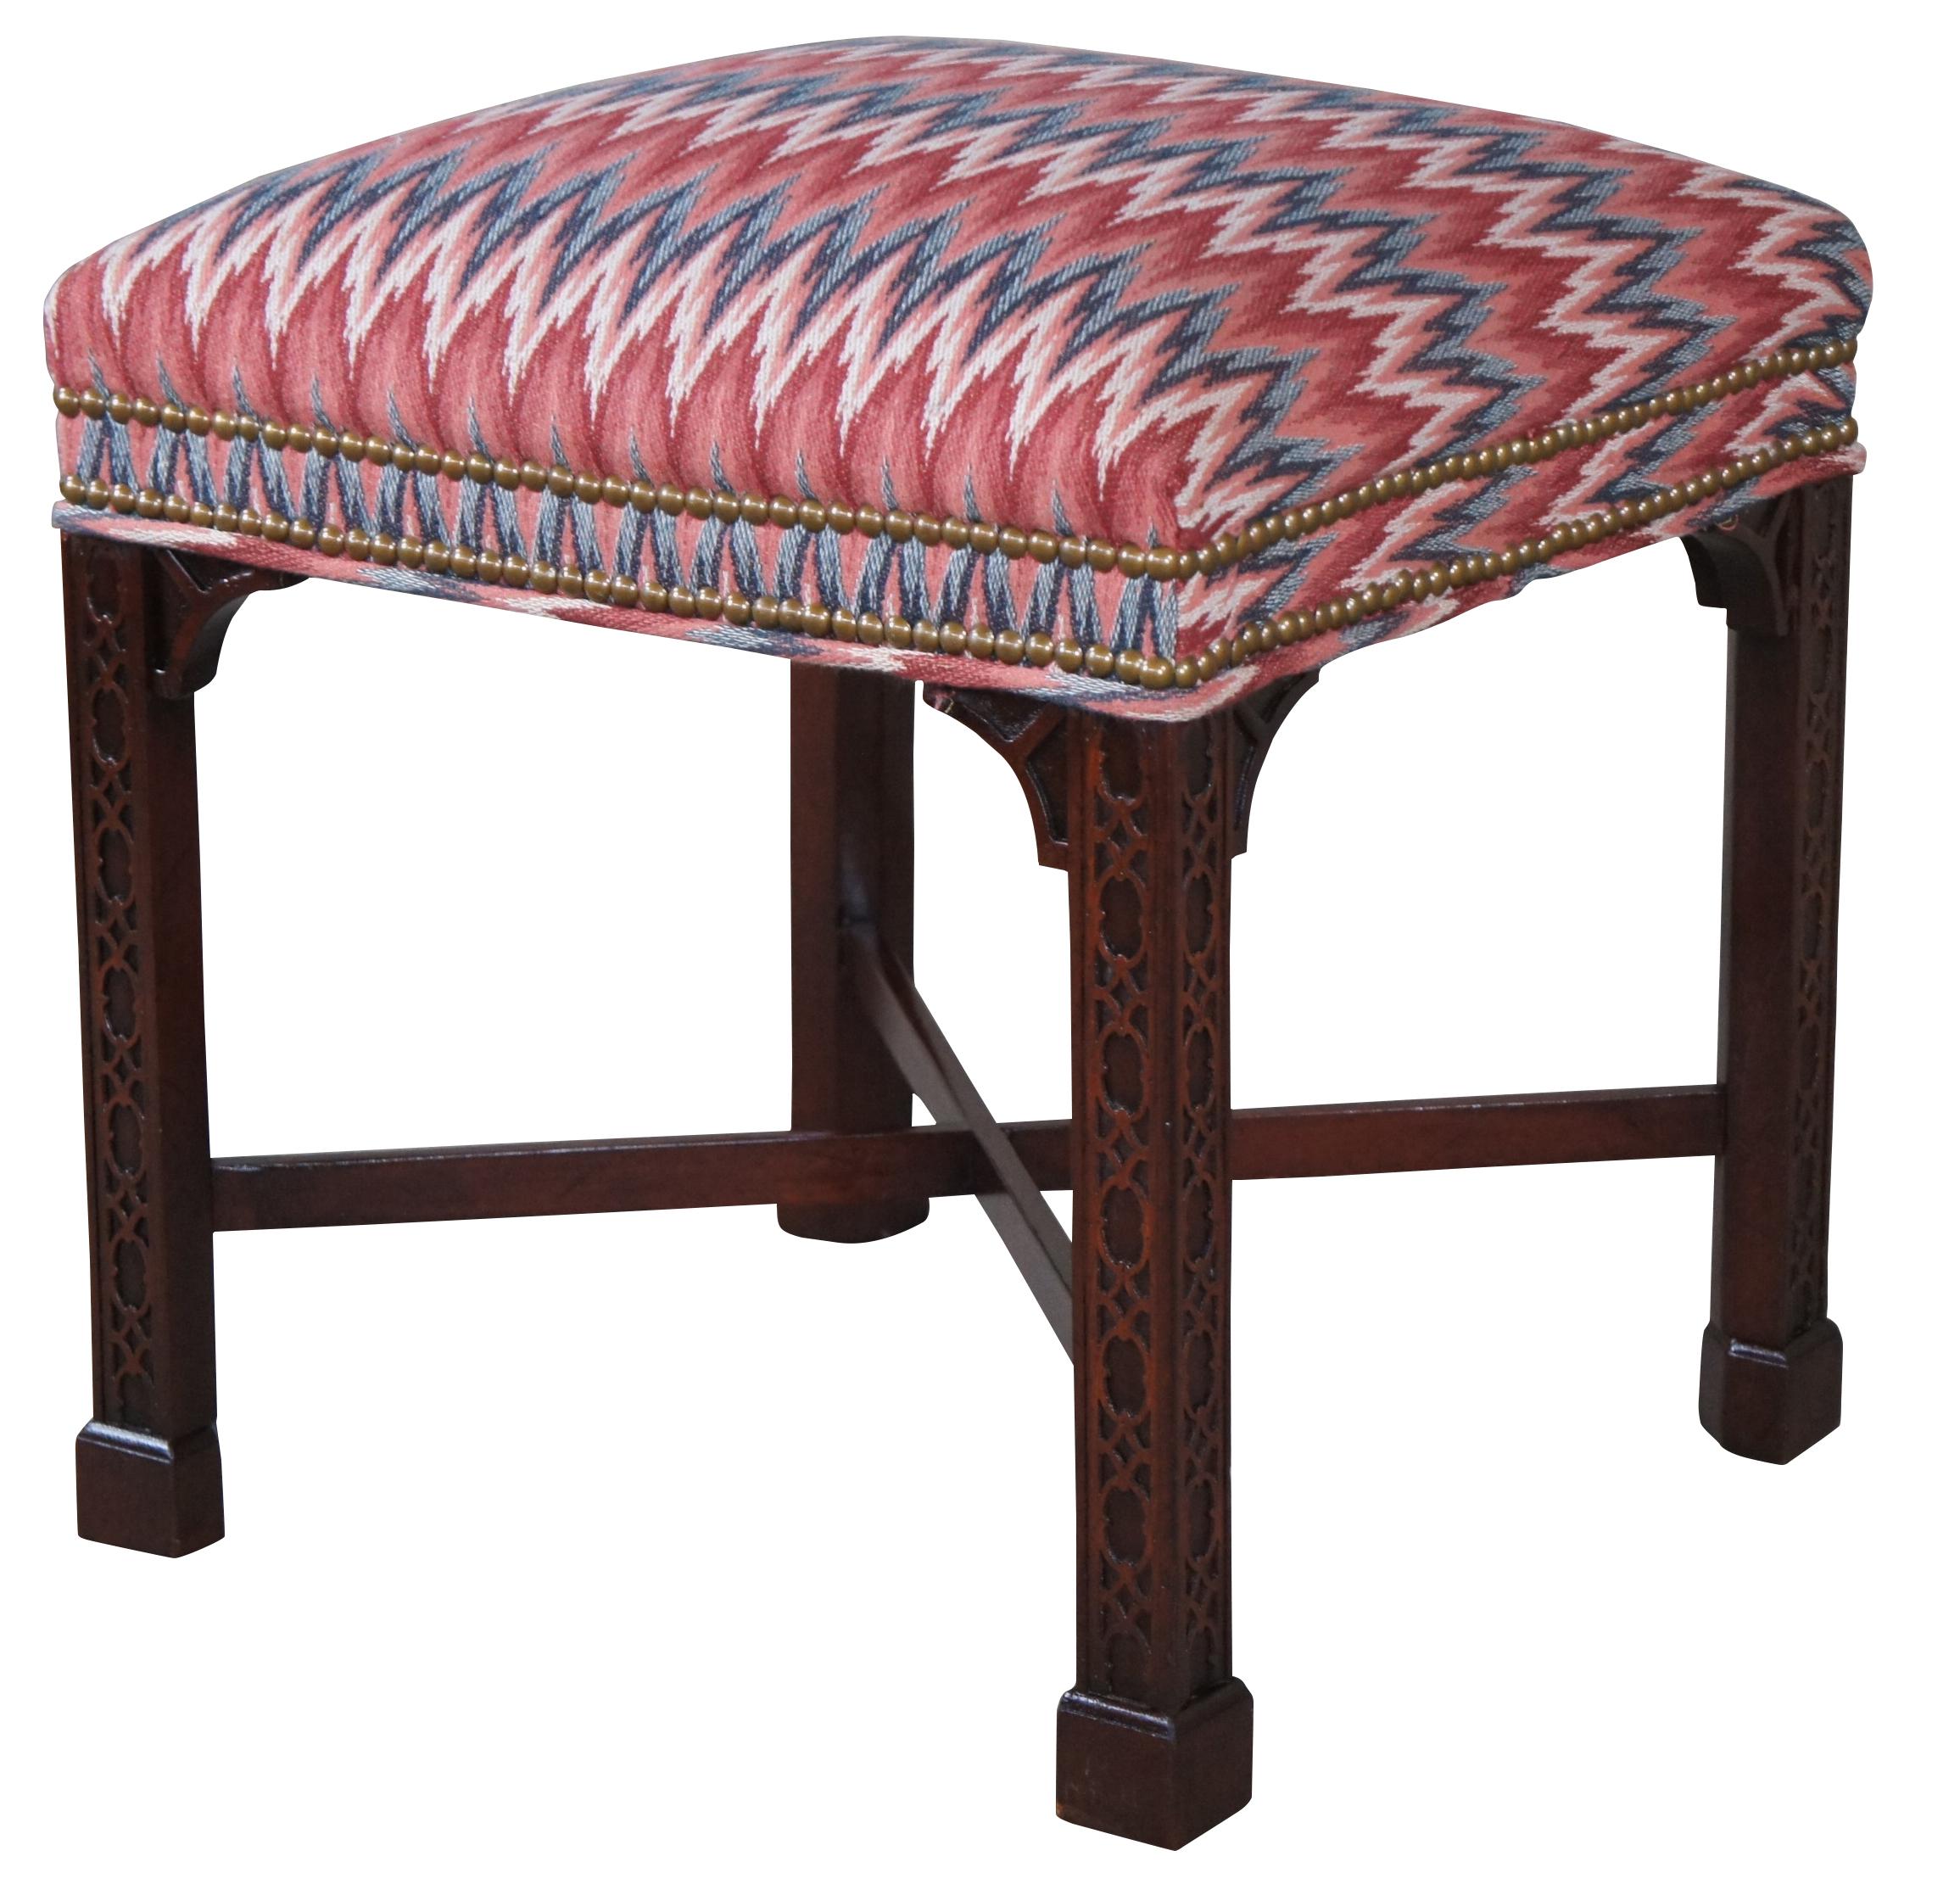 Traditional Chinese Chippendale style ottoman or footstool by Hickory Chair, circa mid 20th century. A rectangular form made from solid mahogany with a chevron upholstered seat and brass nailhead trim. Features beautiful inset carved fretwork